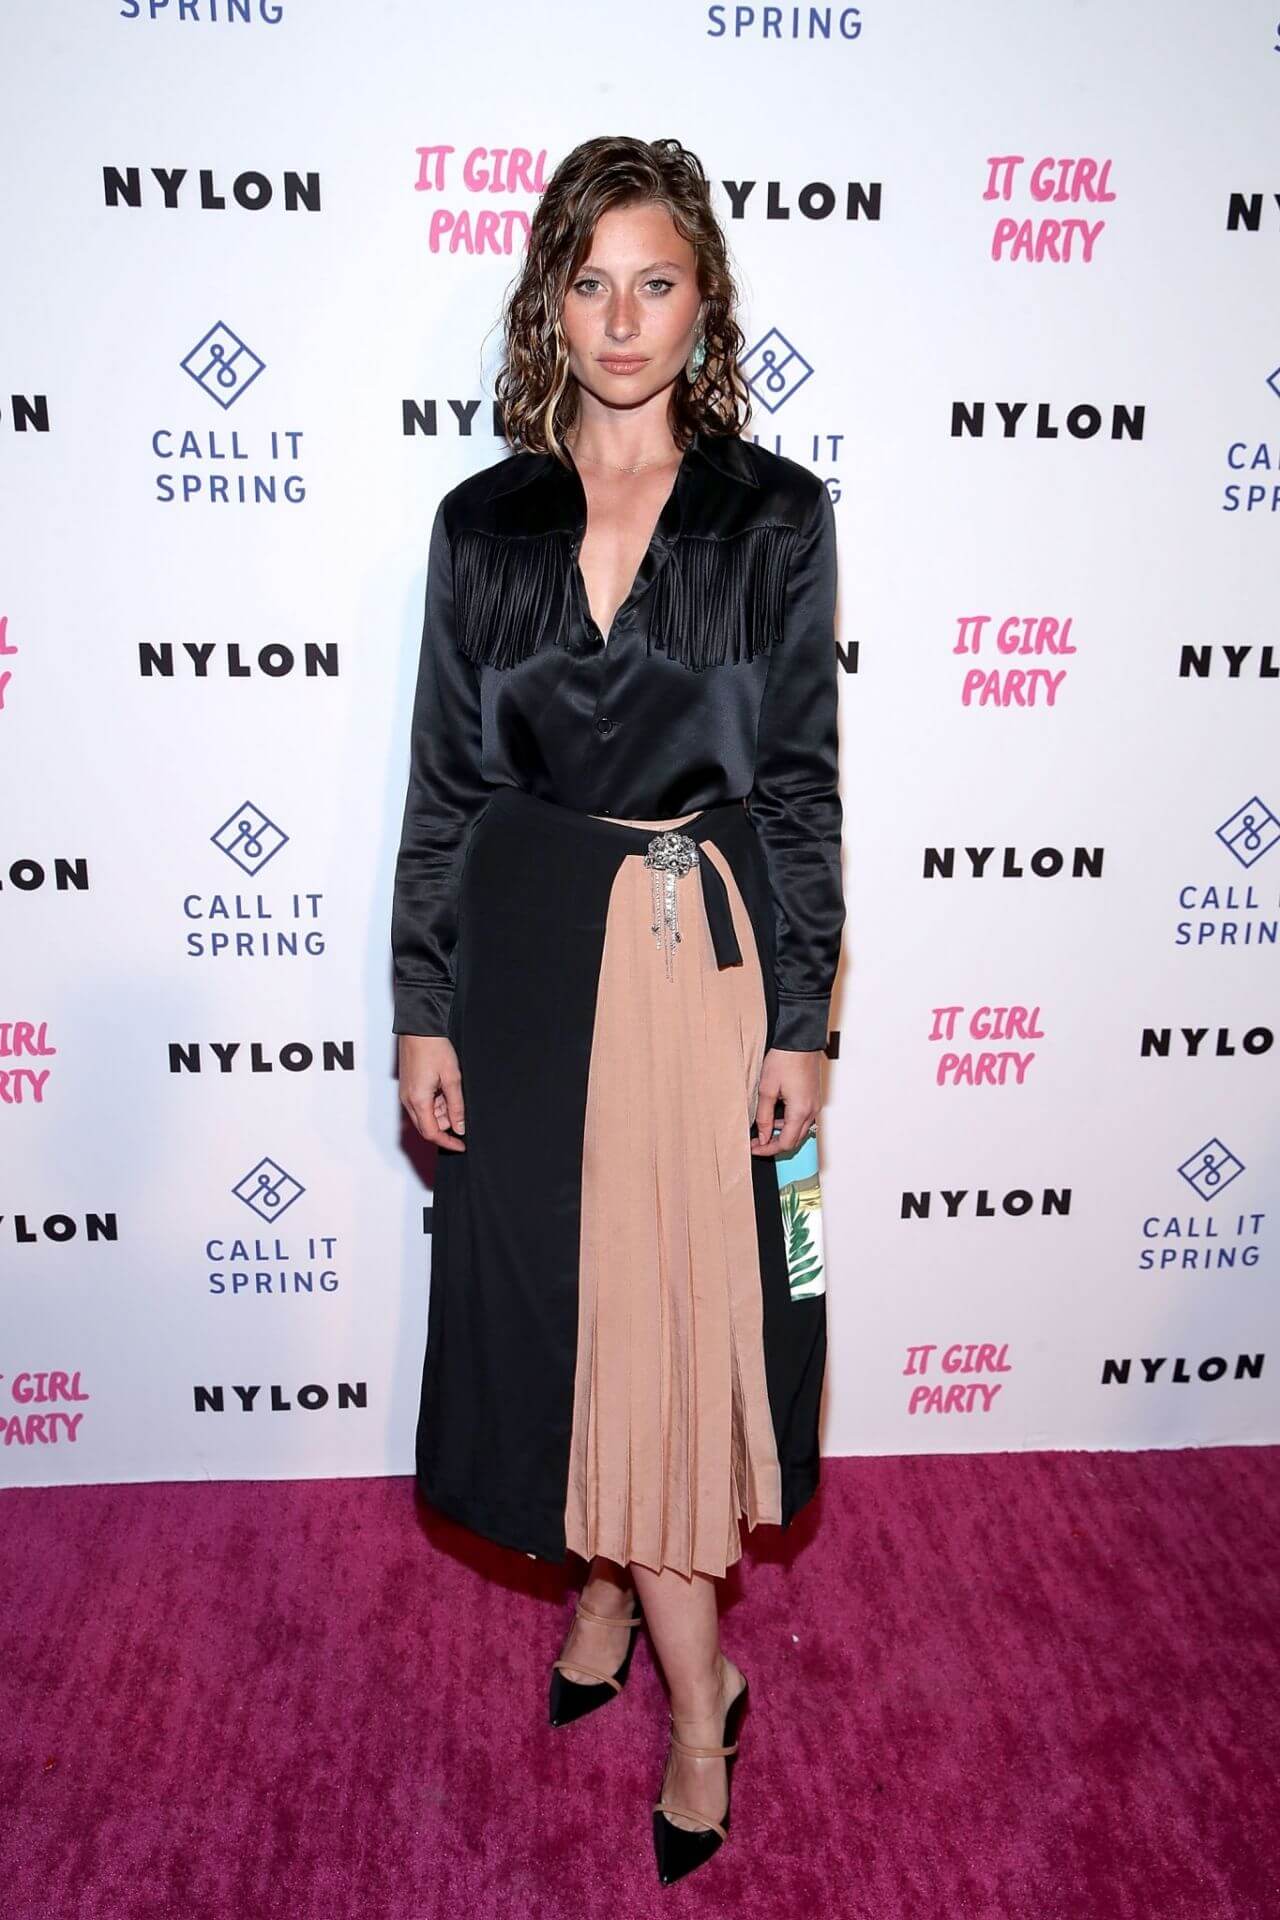 Alyson Aly Michalka - In Shiny Black Full Sleeves  V- Neck Shirt With Long Skirt Outfits